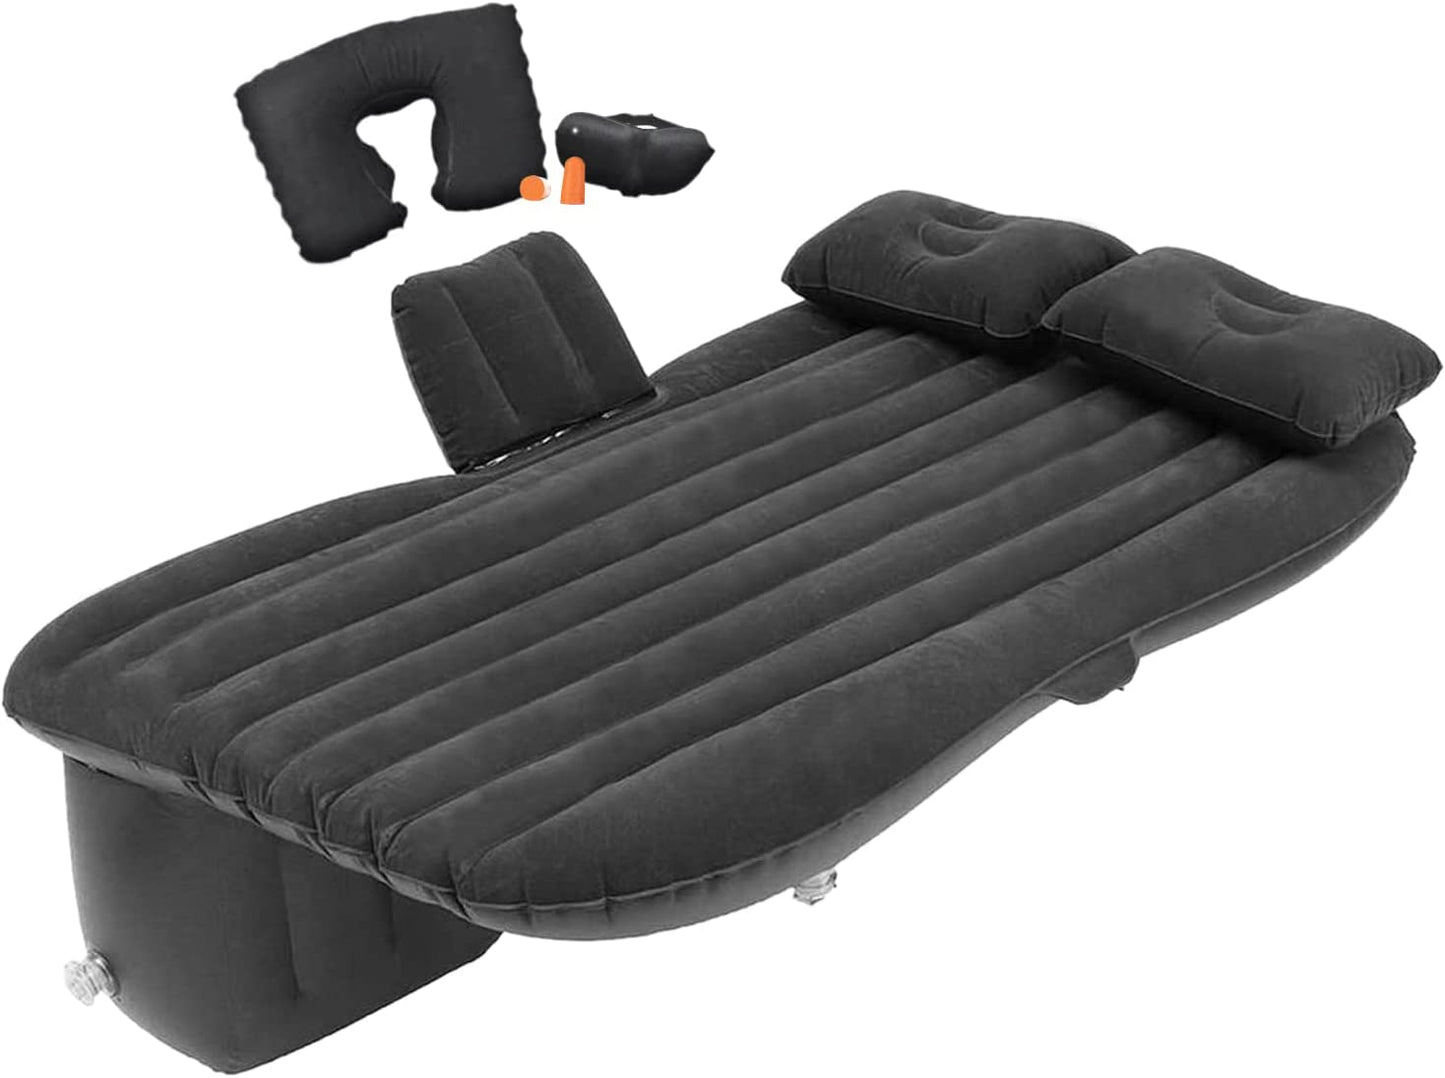 Inflatable Car Air Bed with Pump Kit Travel Air Mattress For Camping Vacation